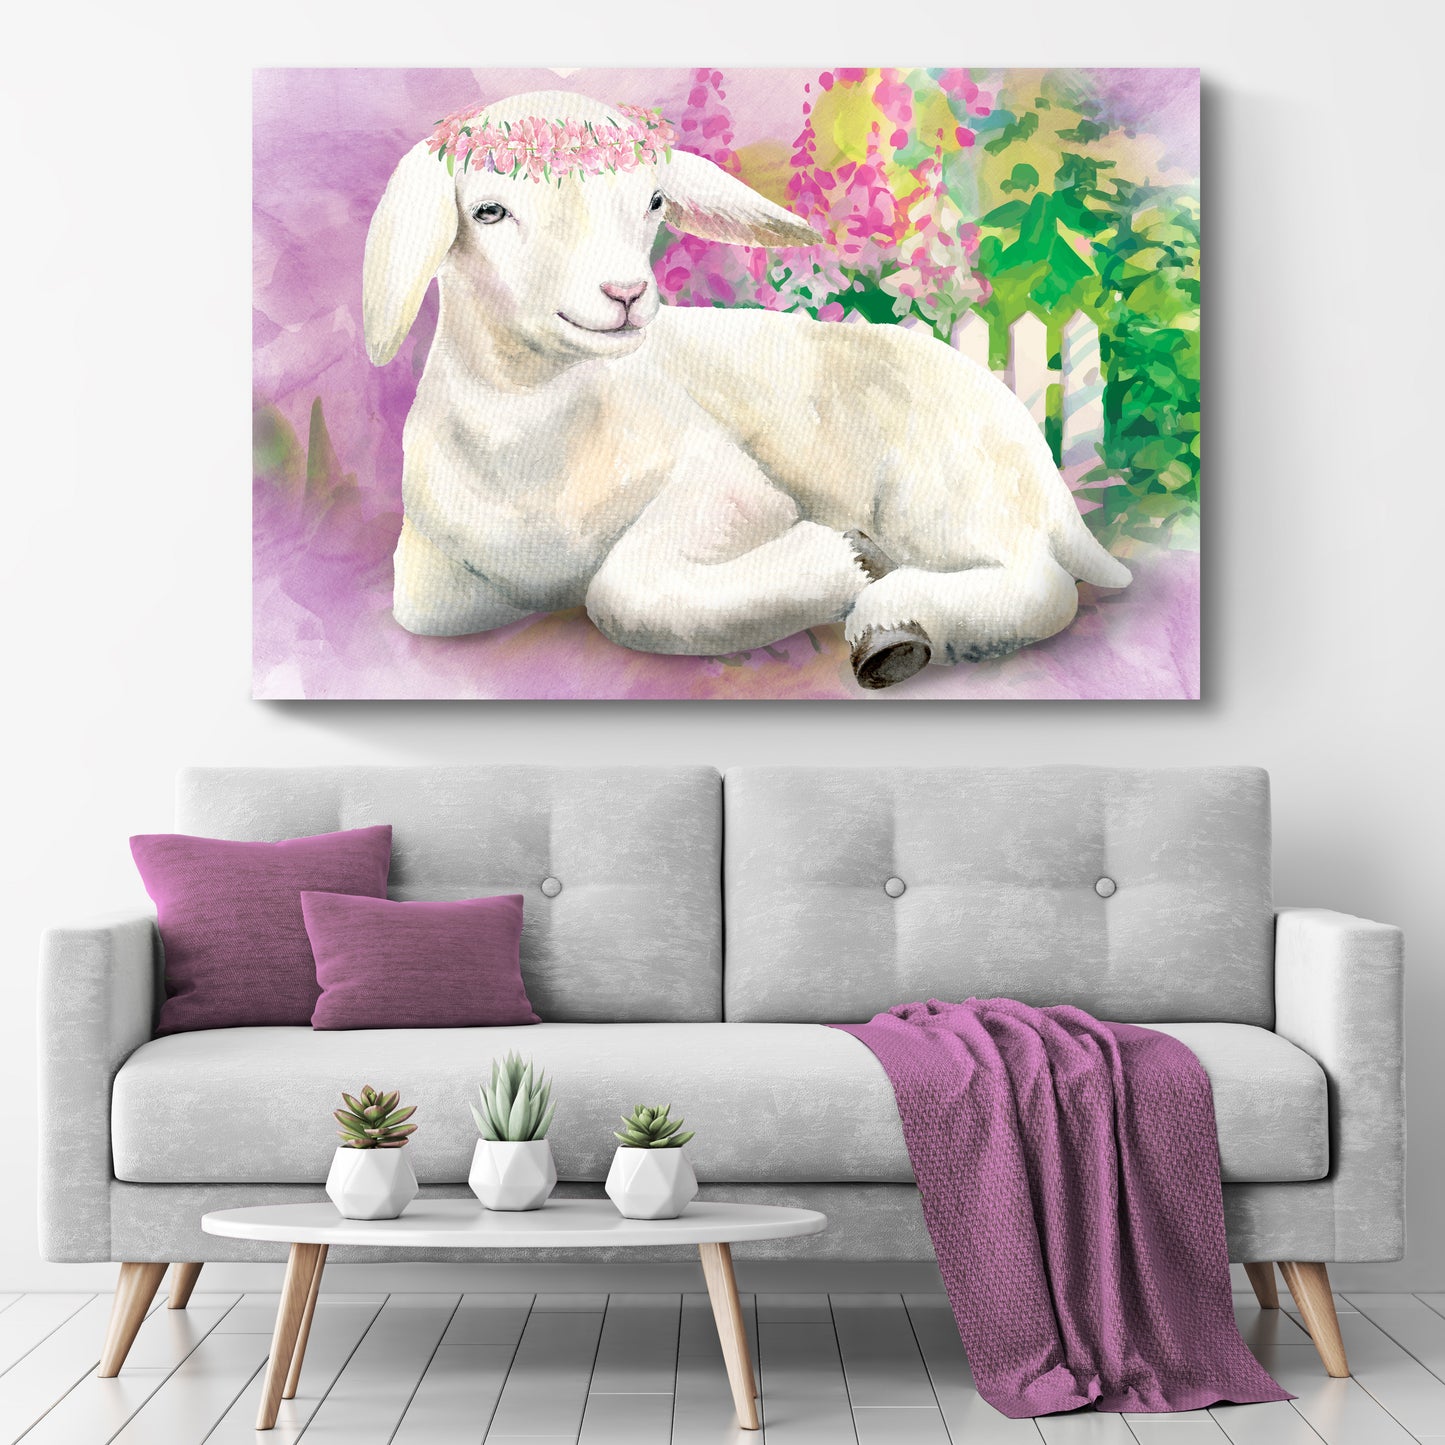 Sitting Pretty Baby Goat Canvas Wall Art Style 2 - Image by Tailored Canvases